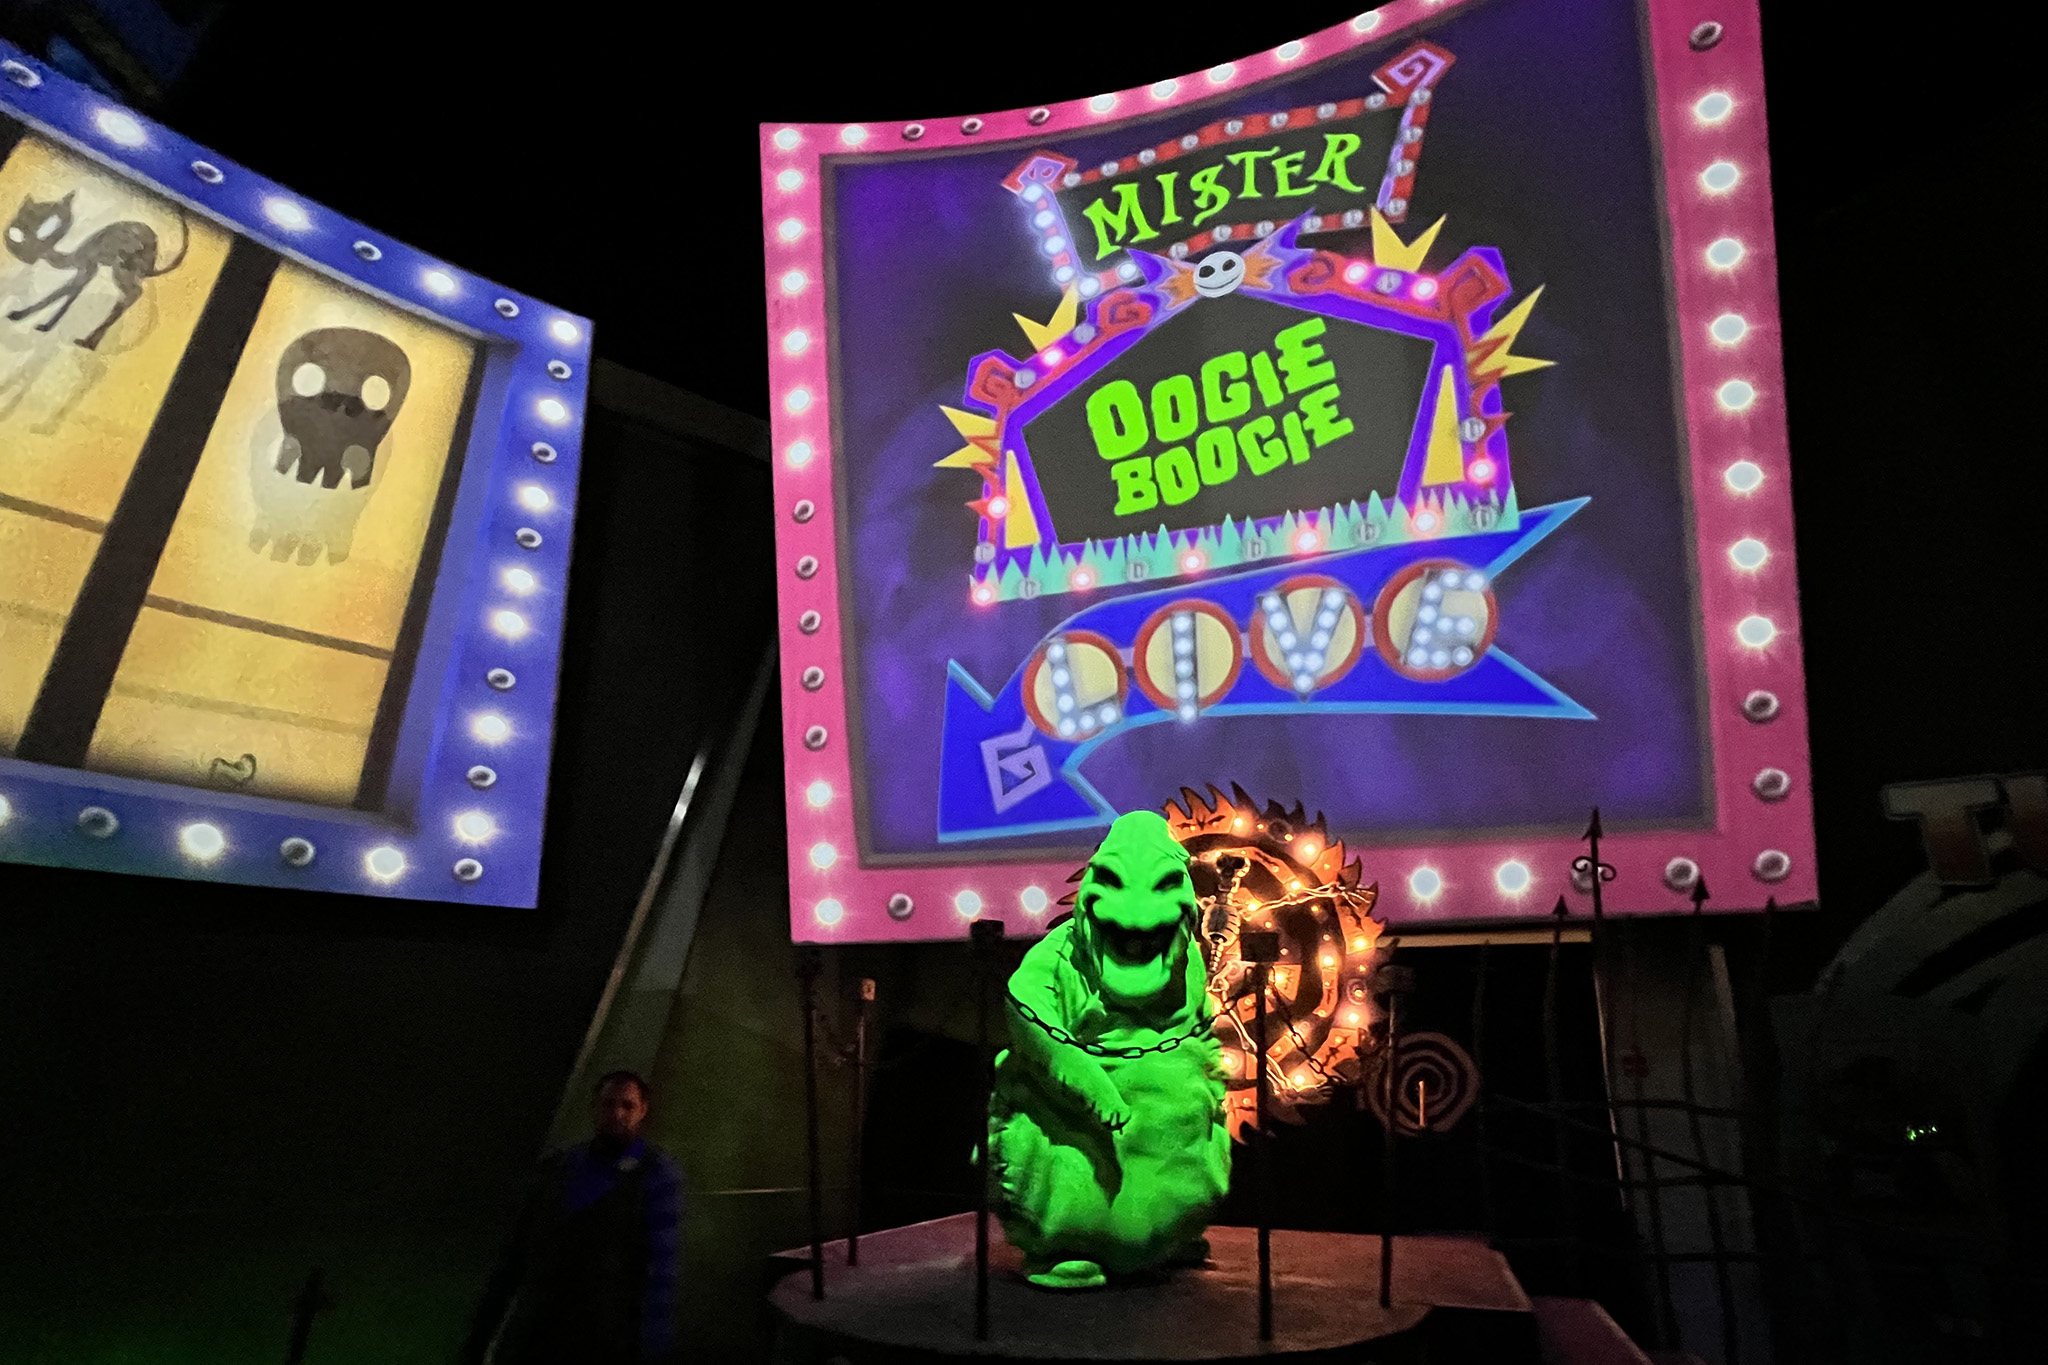 Is the 179 ticket to Disneyland Oogie Boogie Bash worth it?